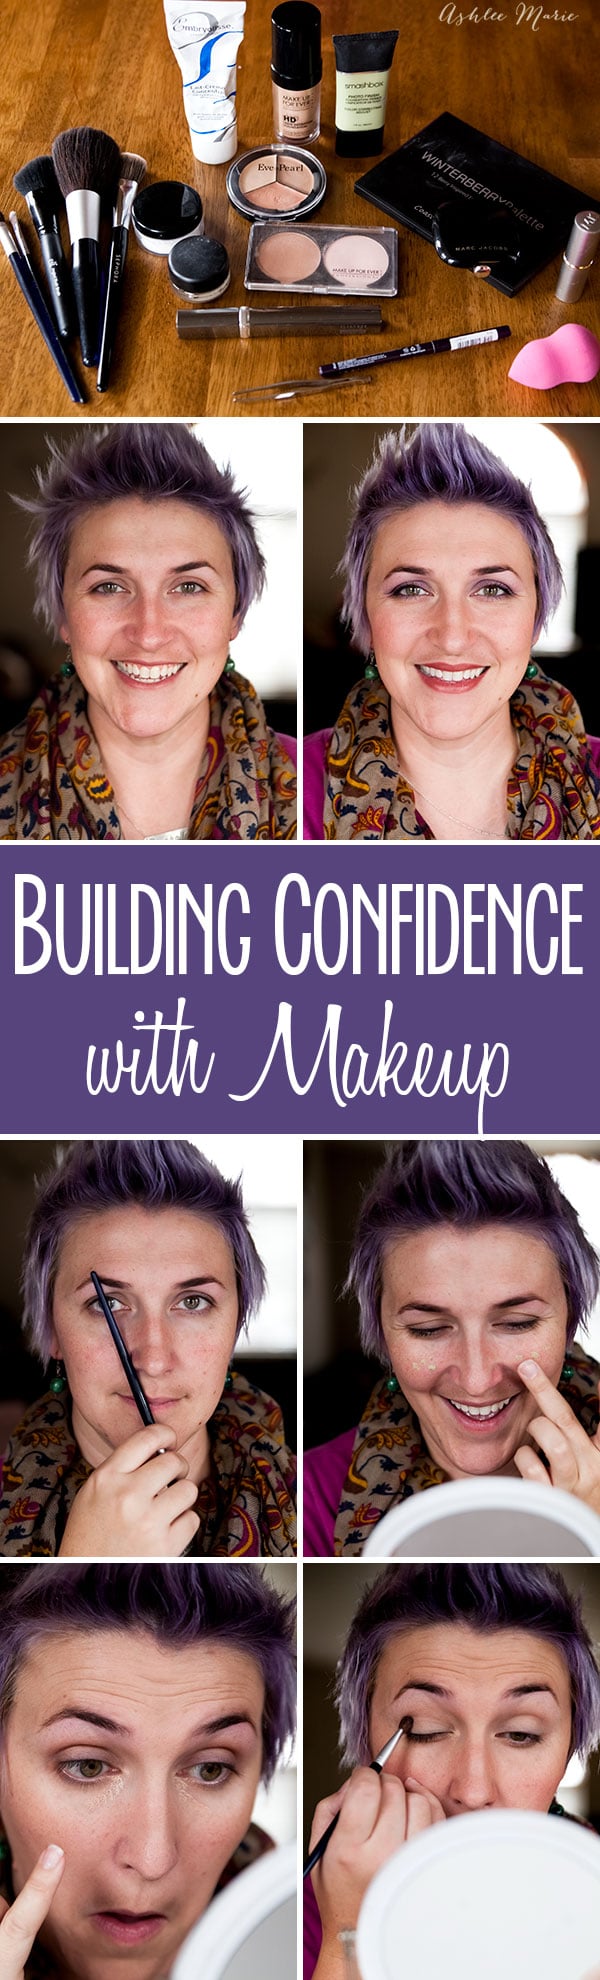 while confidence comes from within sometimes you can help it along by taking care of the outside, my makeup routine that helps me feel more me